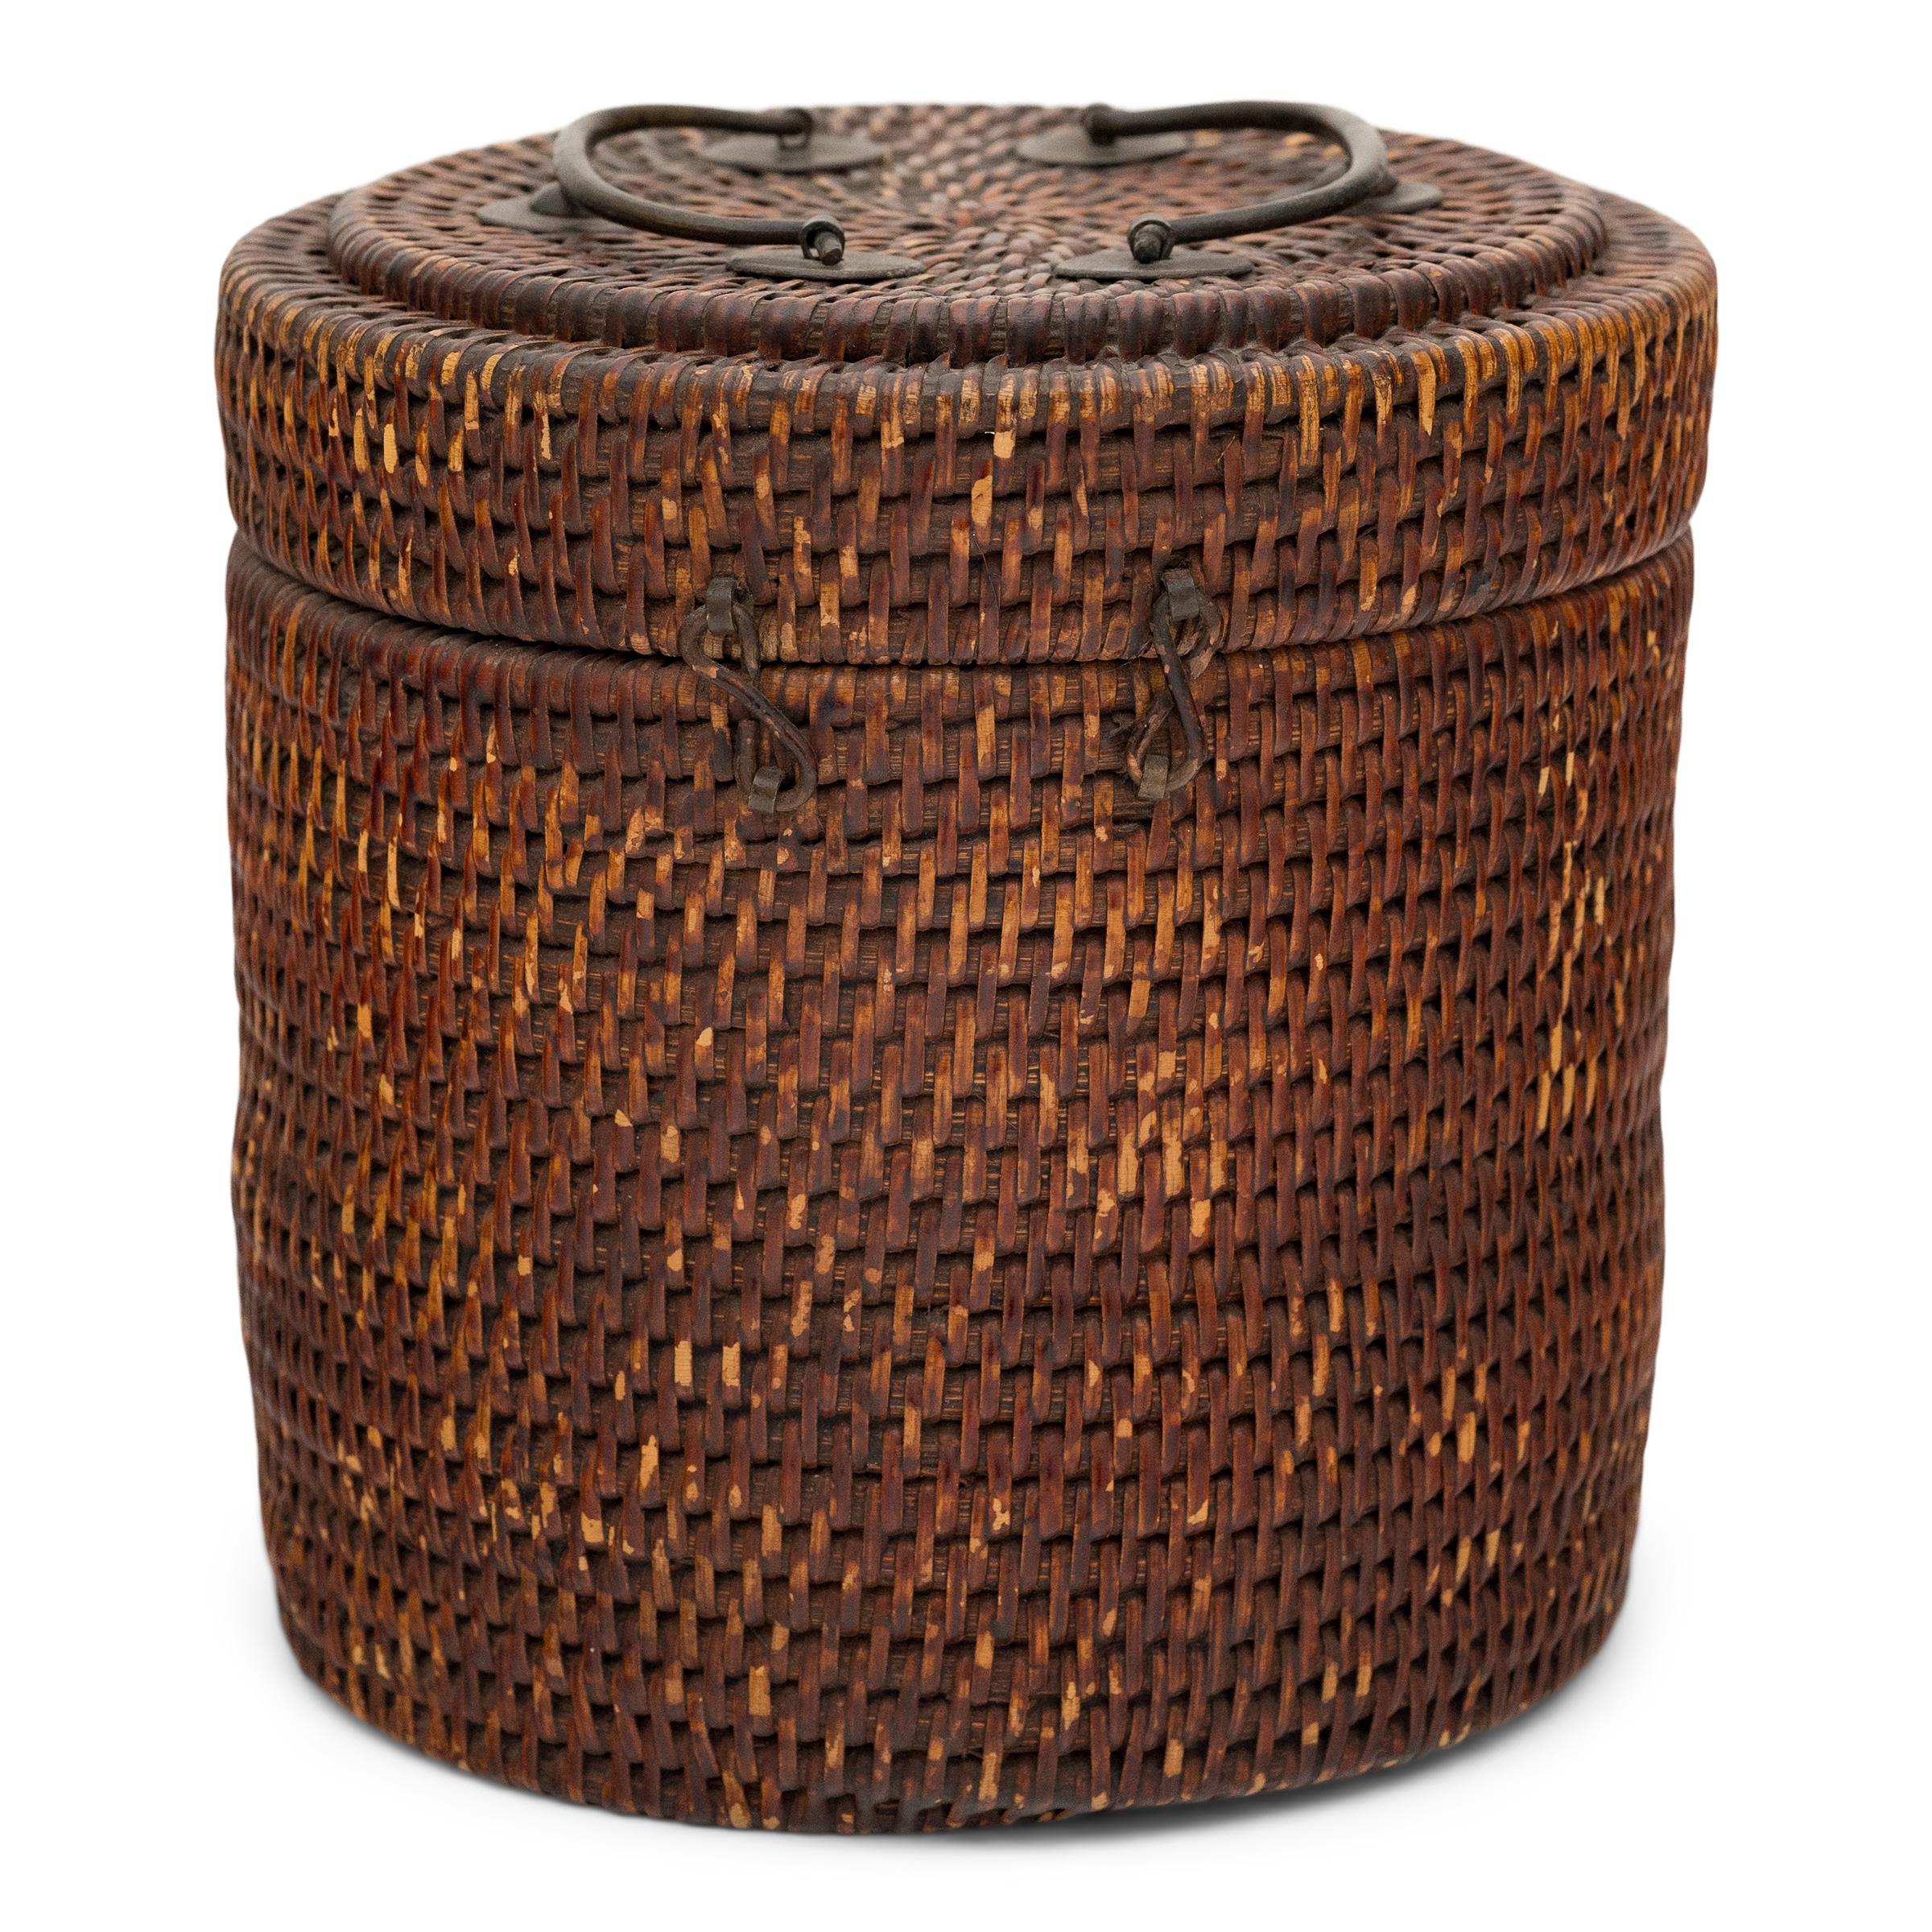 Chinese Export Woven Chinese Tea Cozy Box, c. 1900